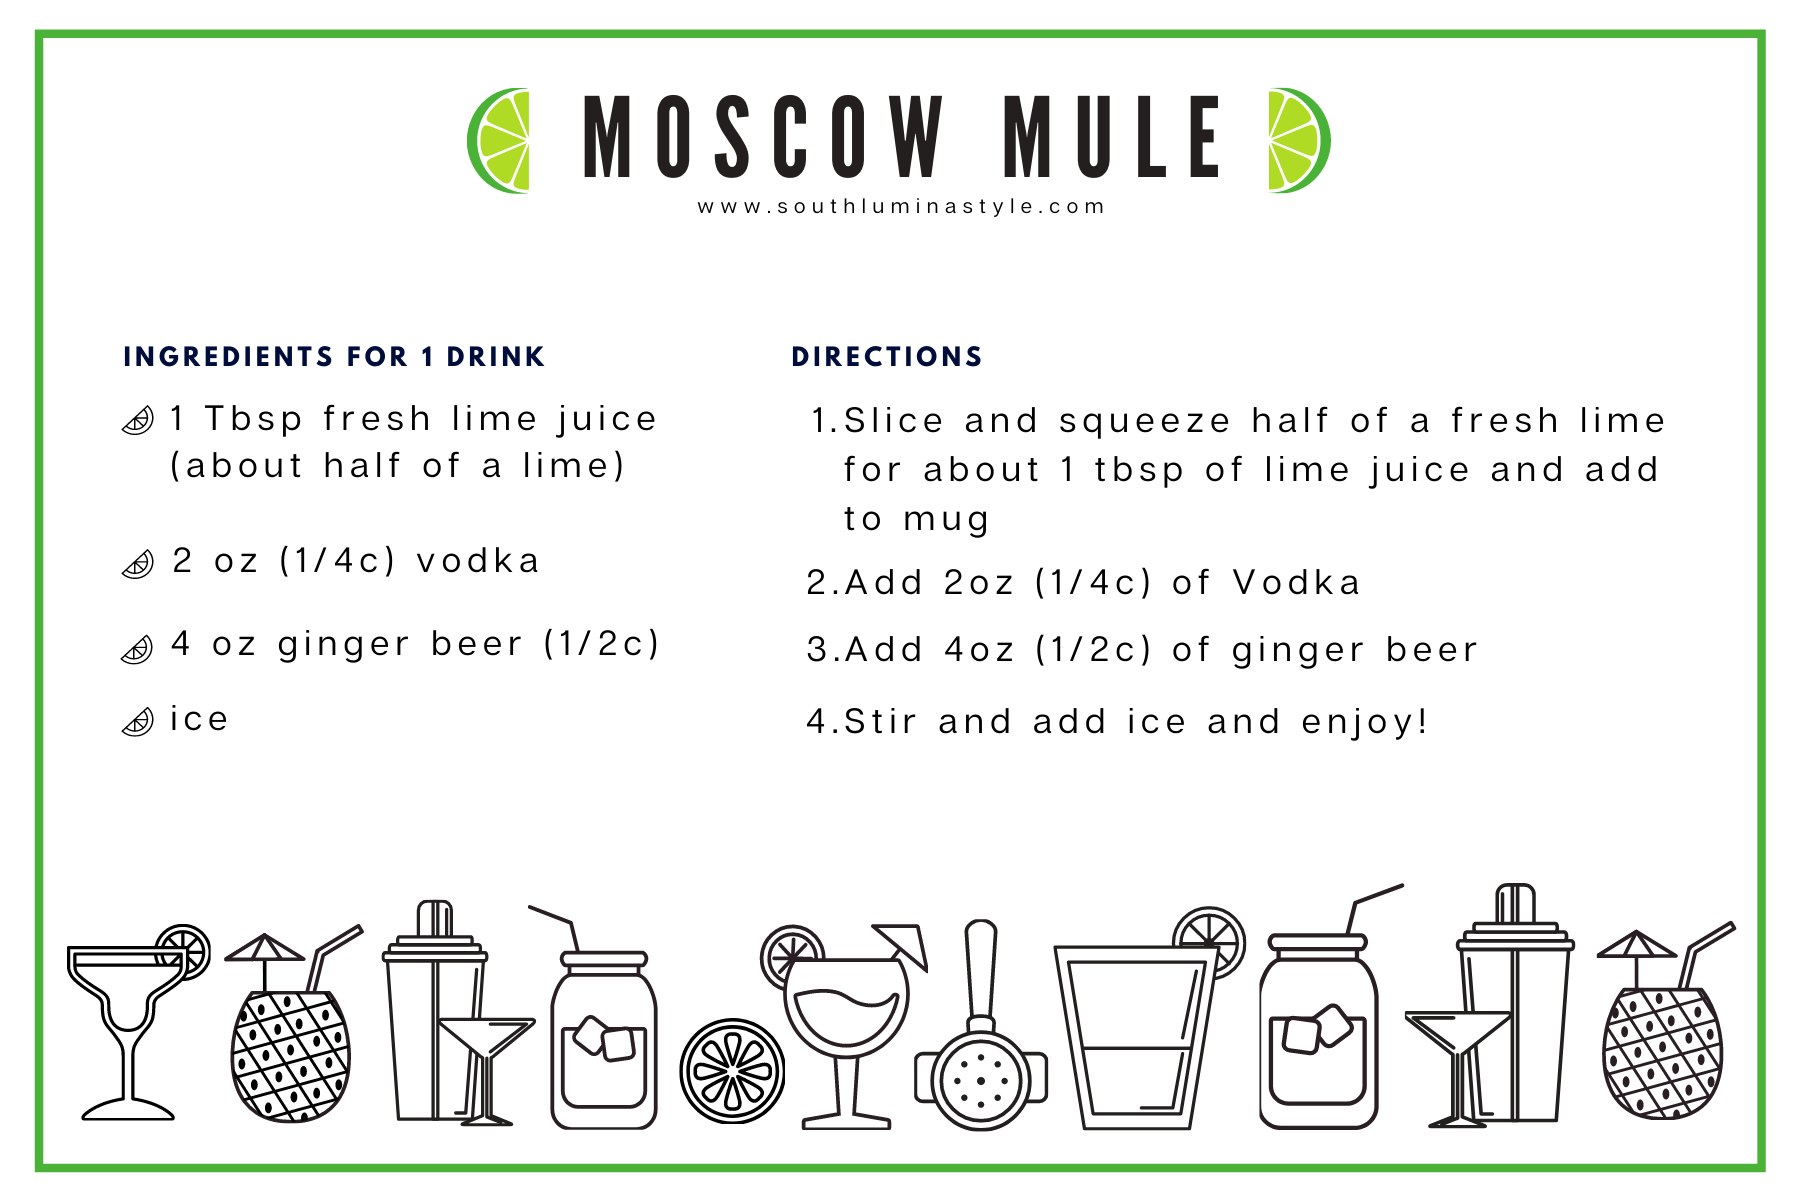 DIY Moscow Mule Cocktail Kit